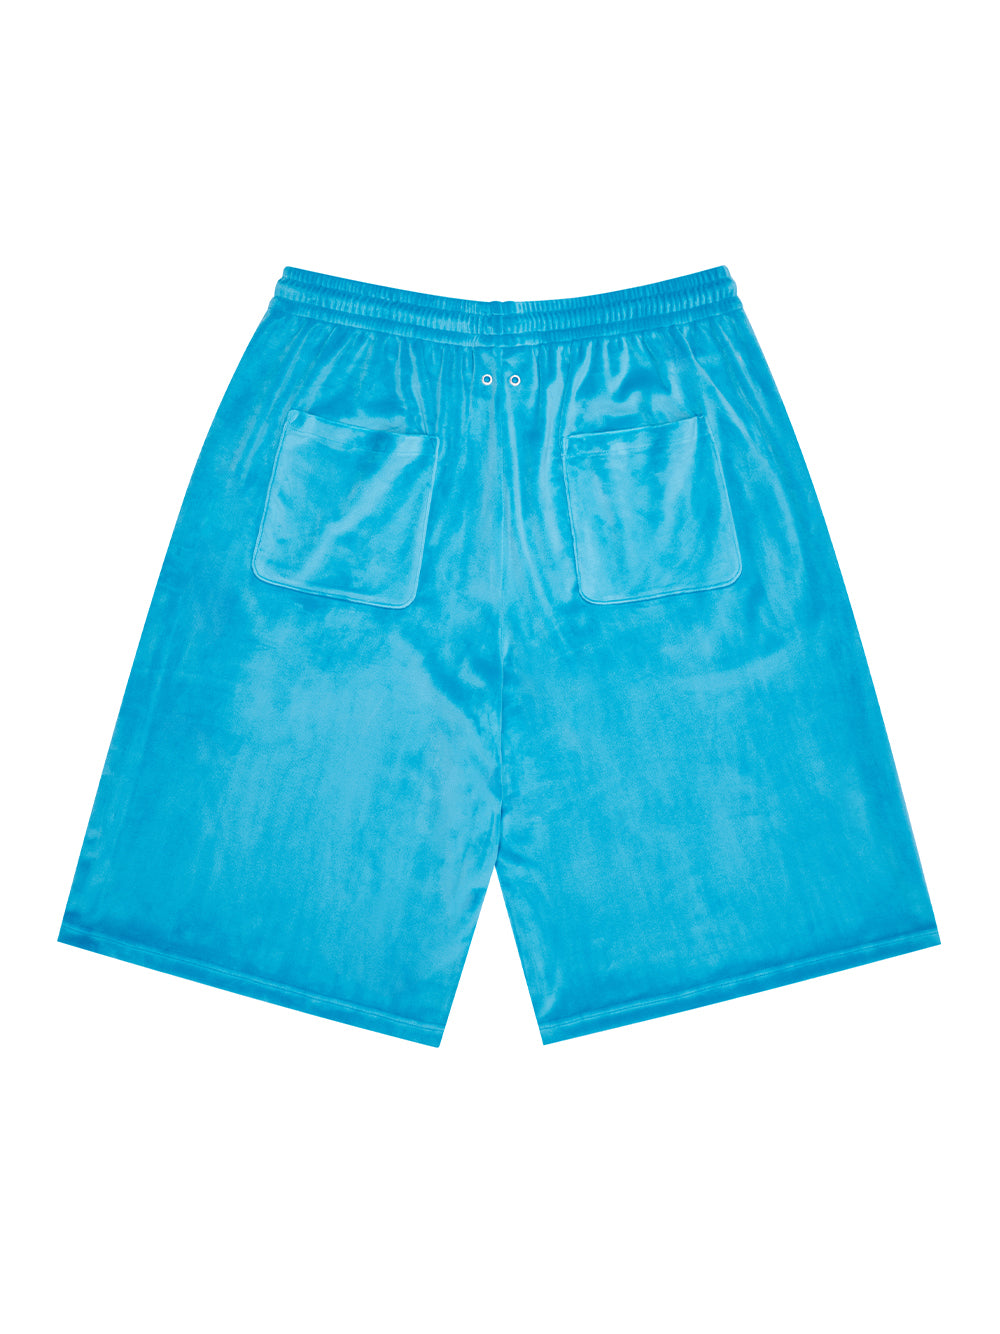 STAY FOR THE NIGHT CASUAL SHORTS (BLUE)